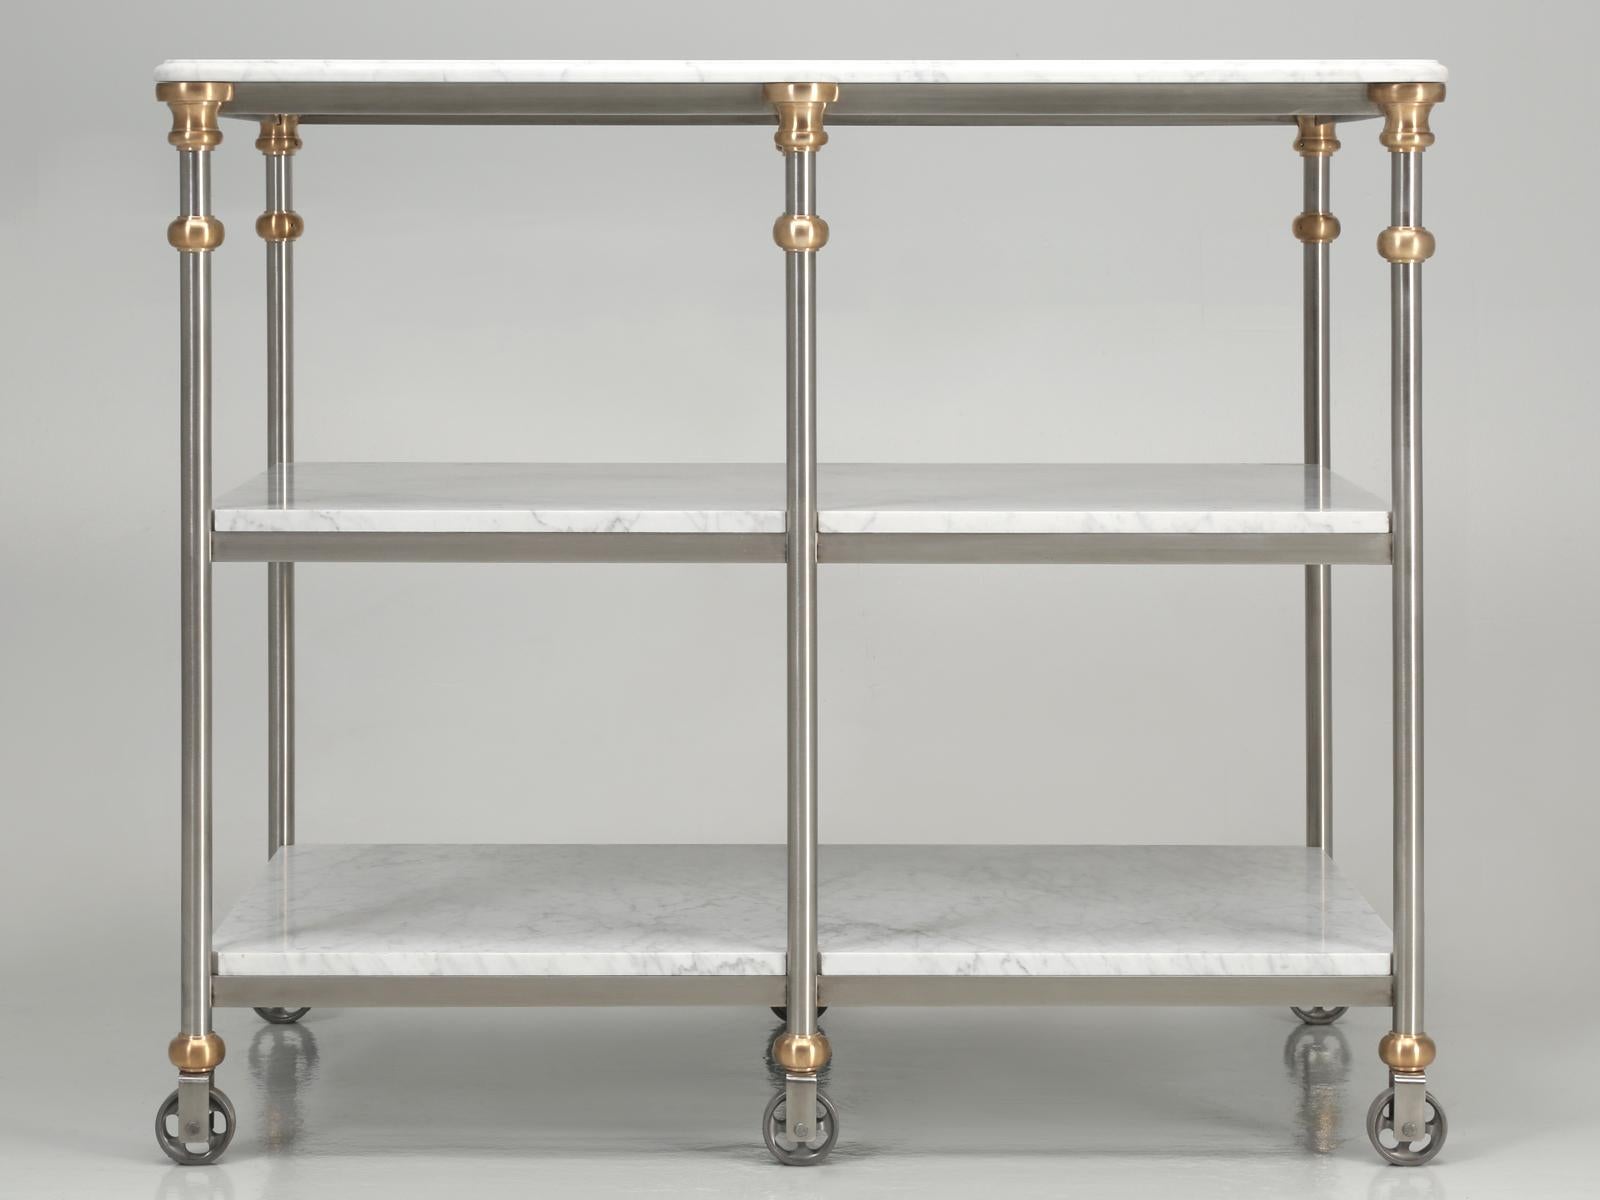 Industrial style stainless and bronze kitchen island with Carrara marble shelves;
Our latest old plank kitchen island is fabricated from stainless steel, solid bronze couplings and features three shelves cut from a single slab of imported Italian